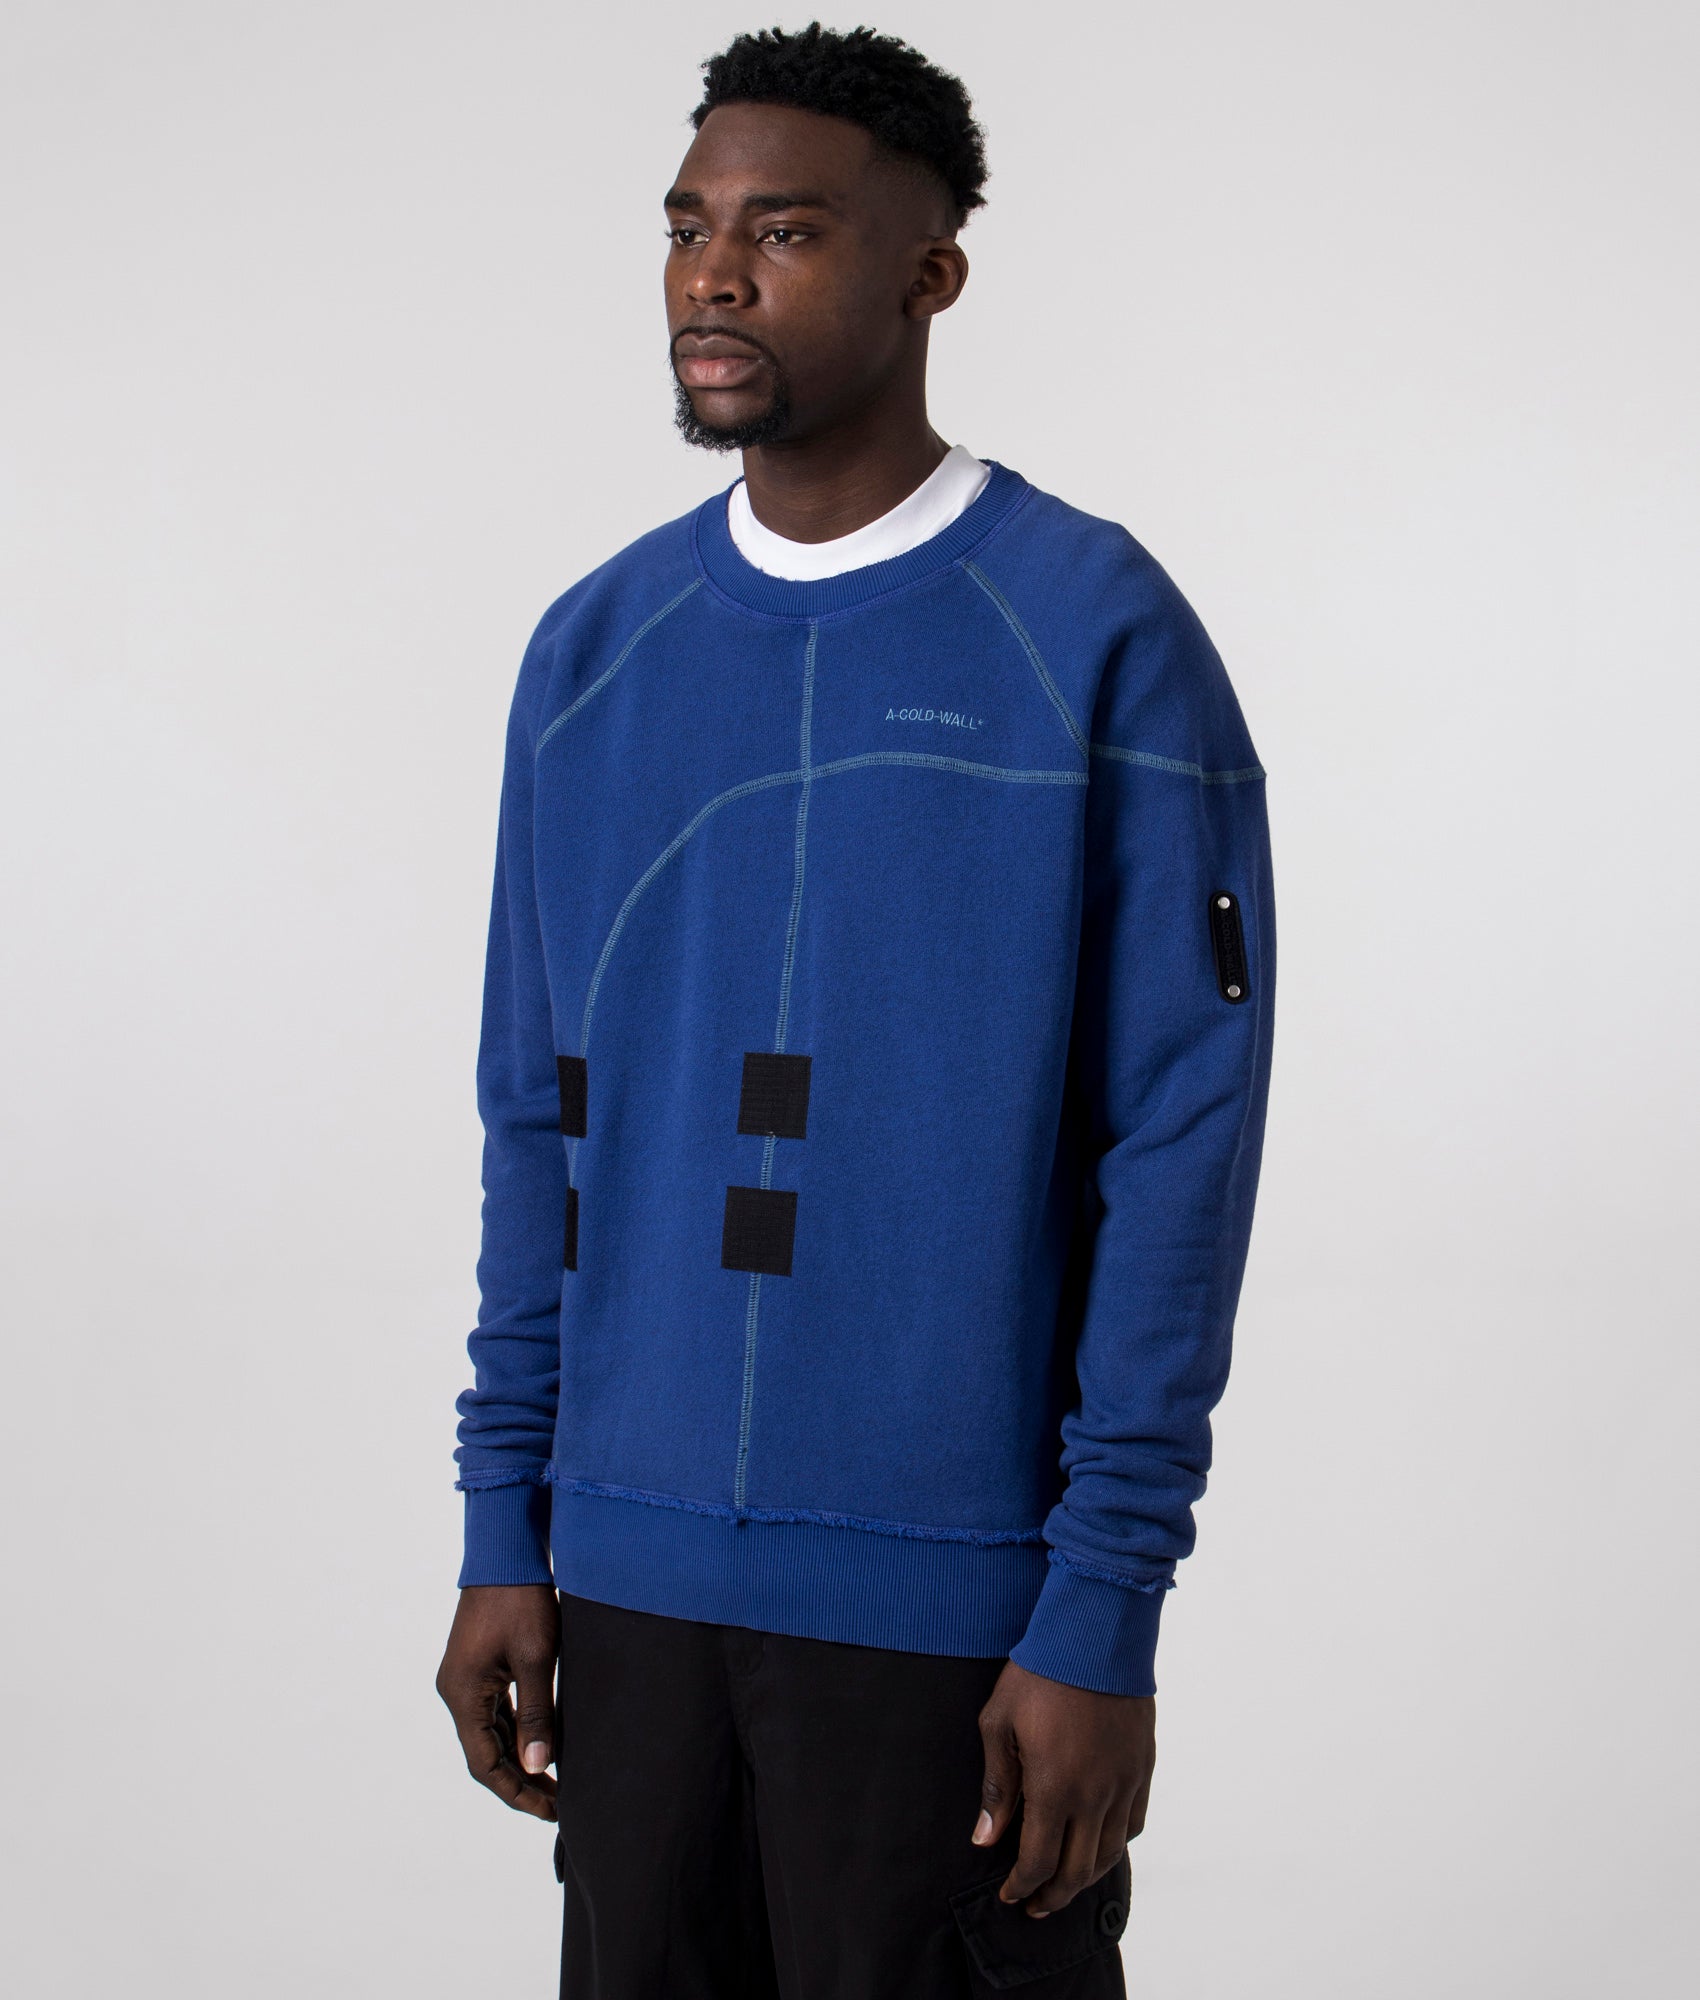 A-COLD-WALL* Mens Relaxed Fit Intersect Sweatshirt - Colour: Volt Blue - Size: XL